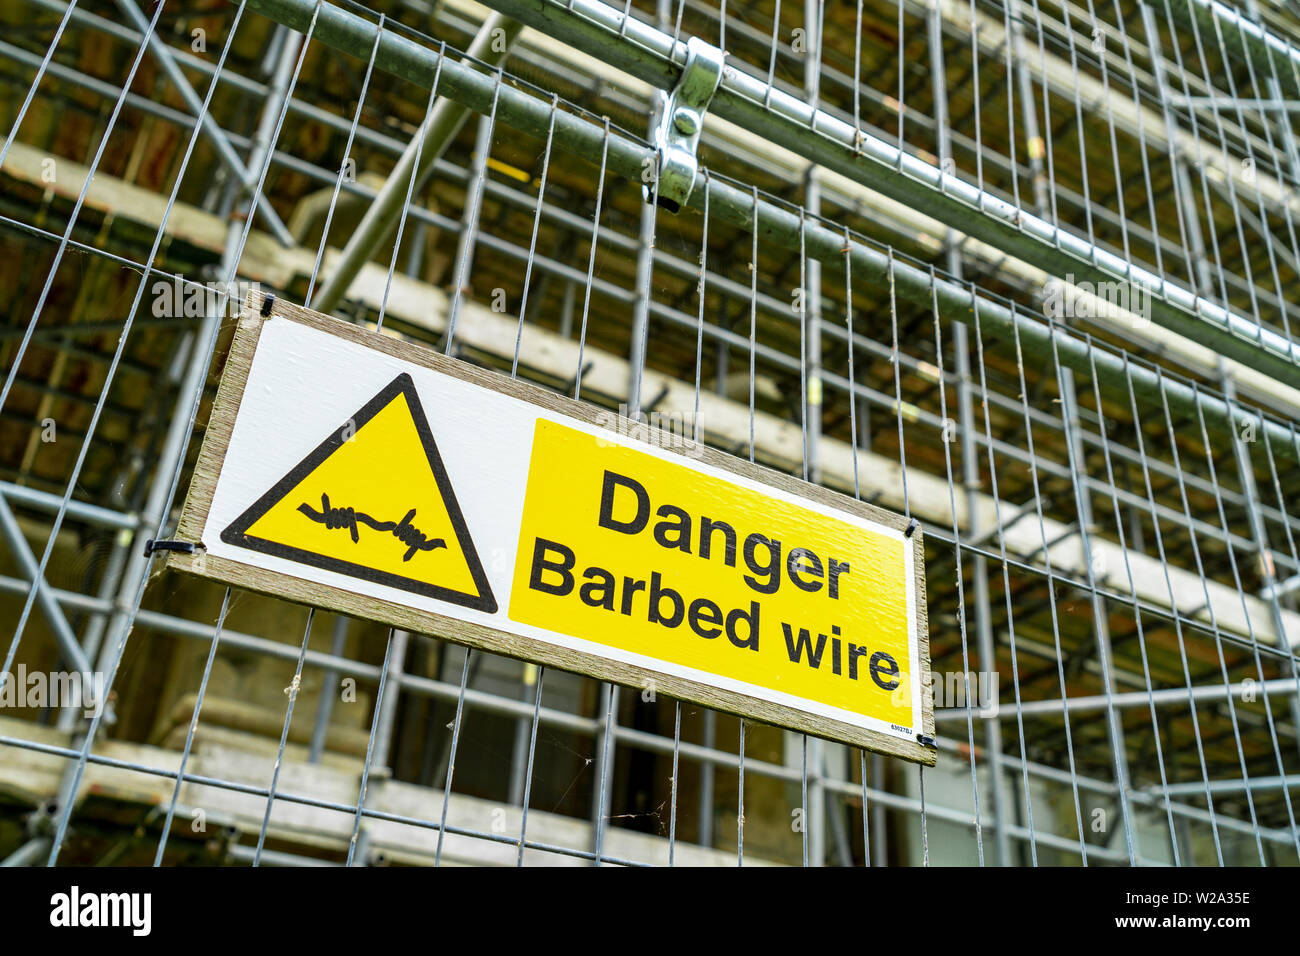 Danger barbed wire safety sign on metal fence Stock Photo